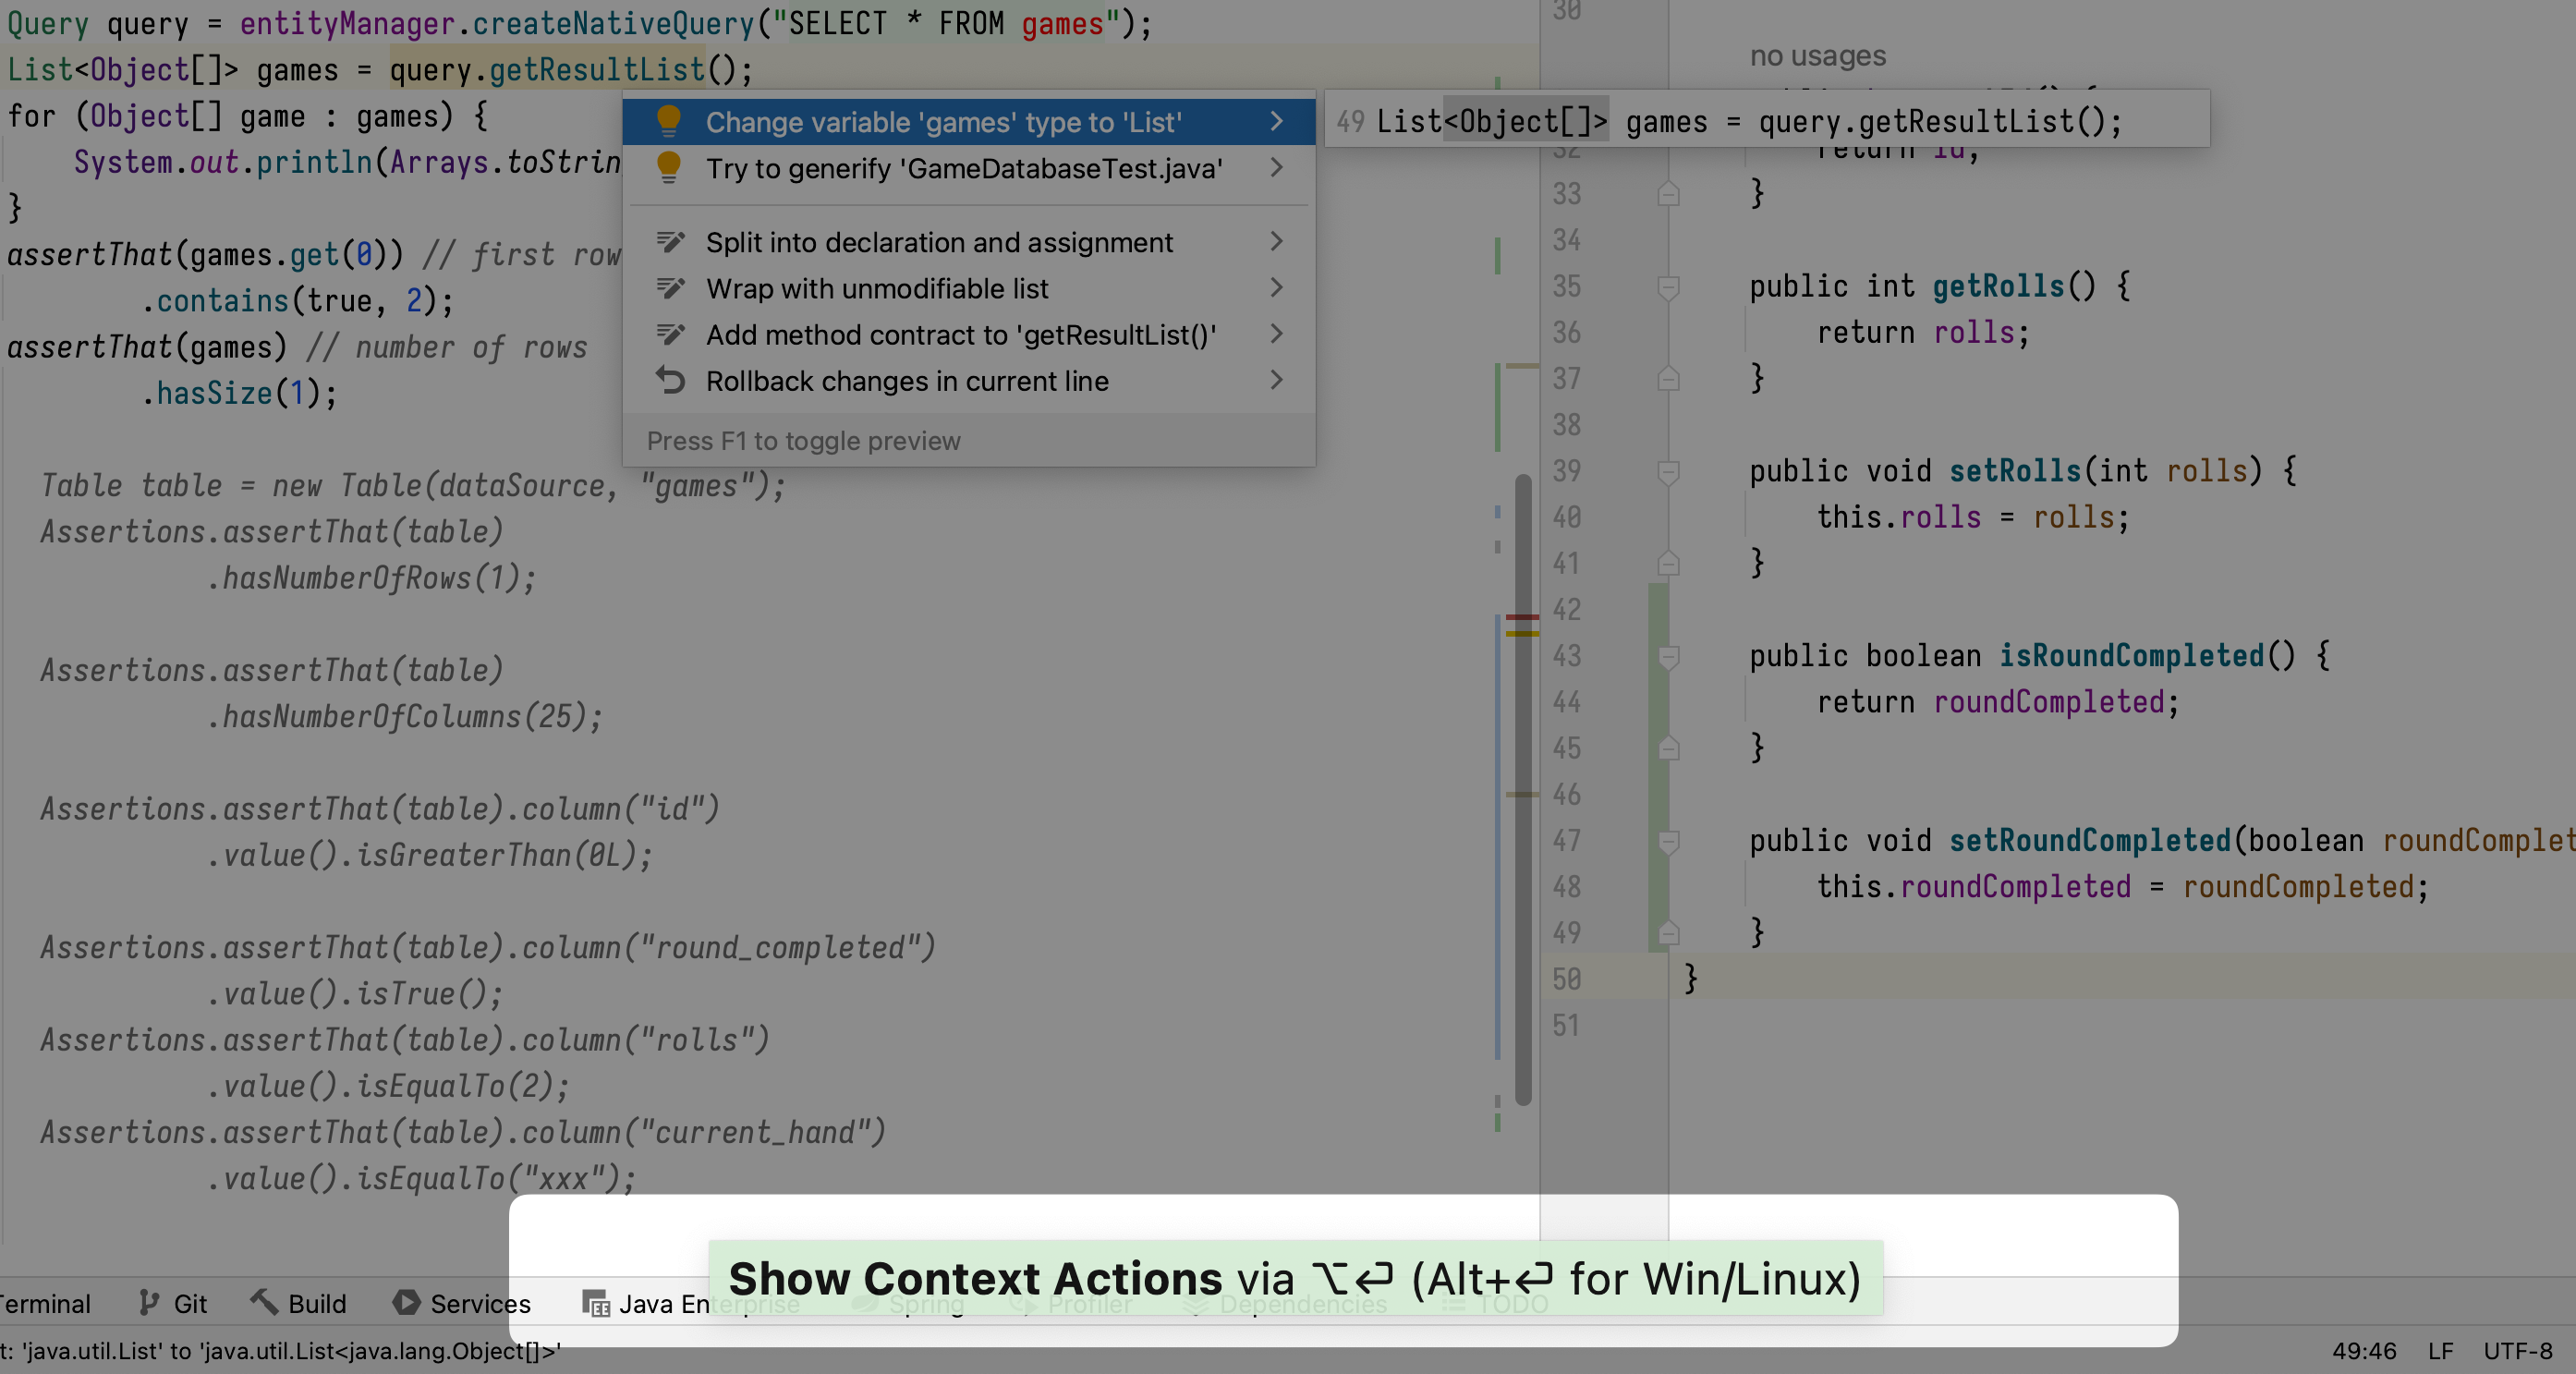 Screenshot of the Presentation Assistant showing the Context Actions shortcut at the bottom of the screen.